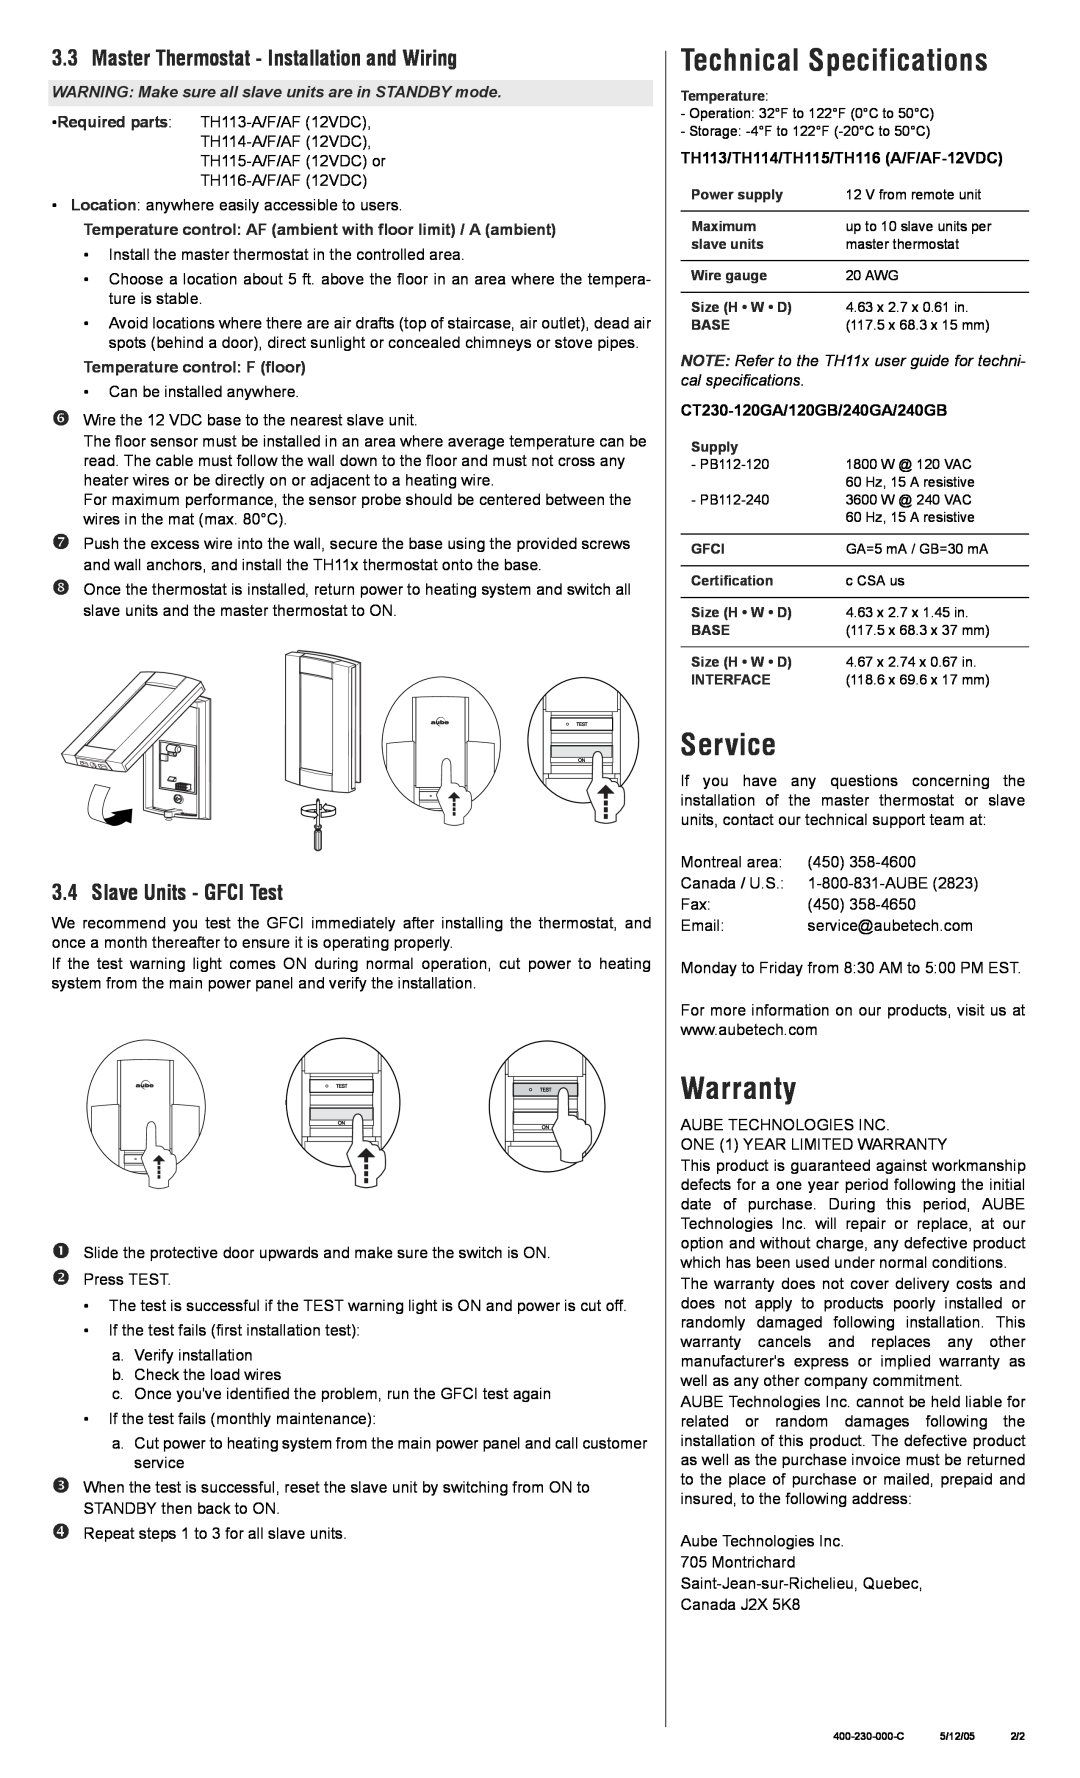 Aube Technologies TH116 A Technical Specifications, Service, Warranty, Master Thermostat - Installation and Wiring 